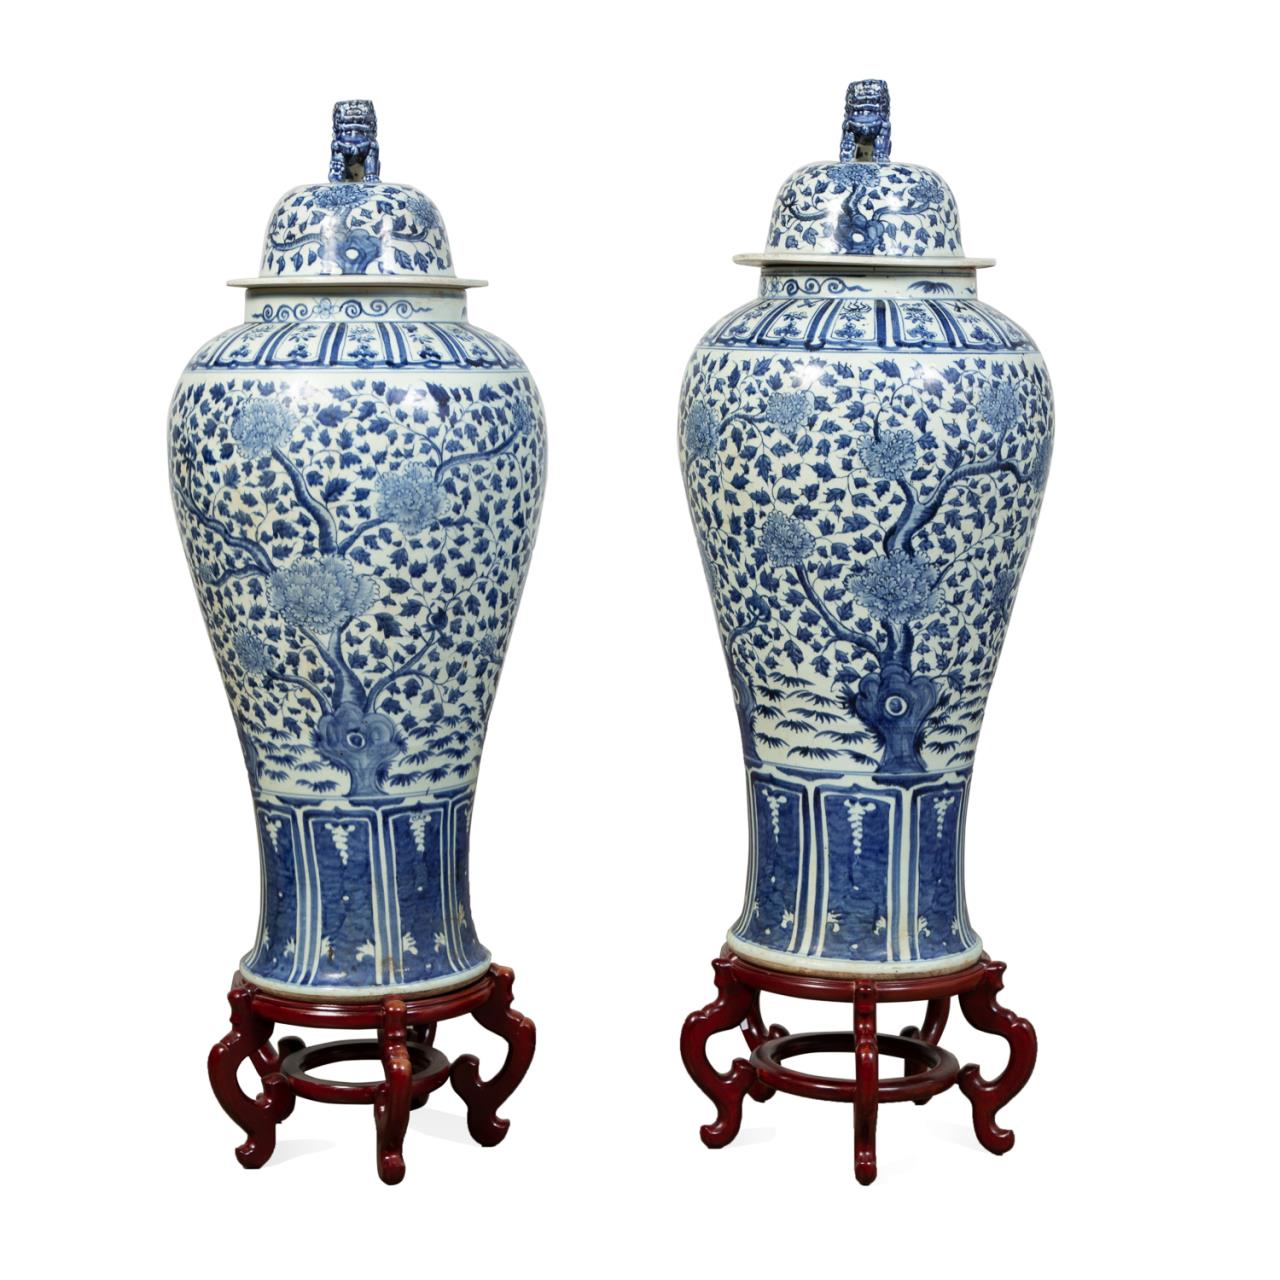 PAIR OF CHINESE BLUE & WHITE GINGER